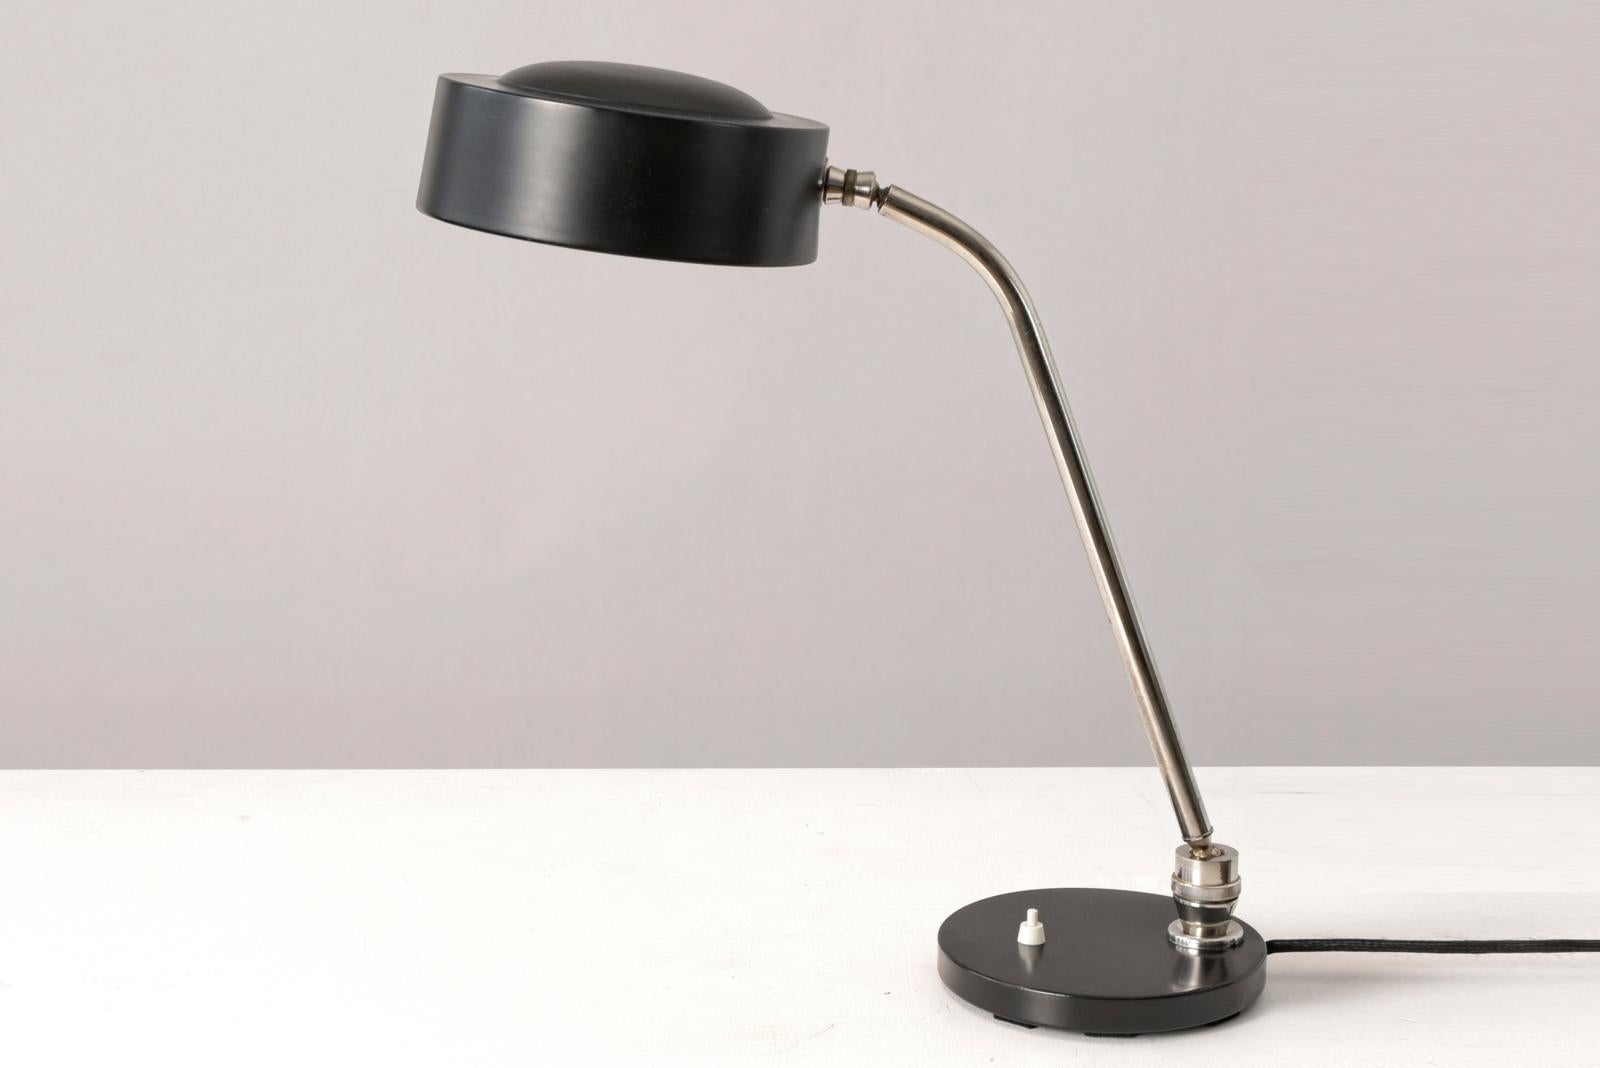 Mid-Century Modern Table Lamp by André Mounique and Alain Jujeau for Jumo, France - 1965 For Sale